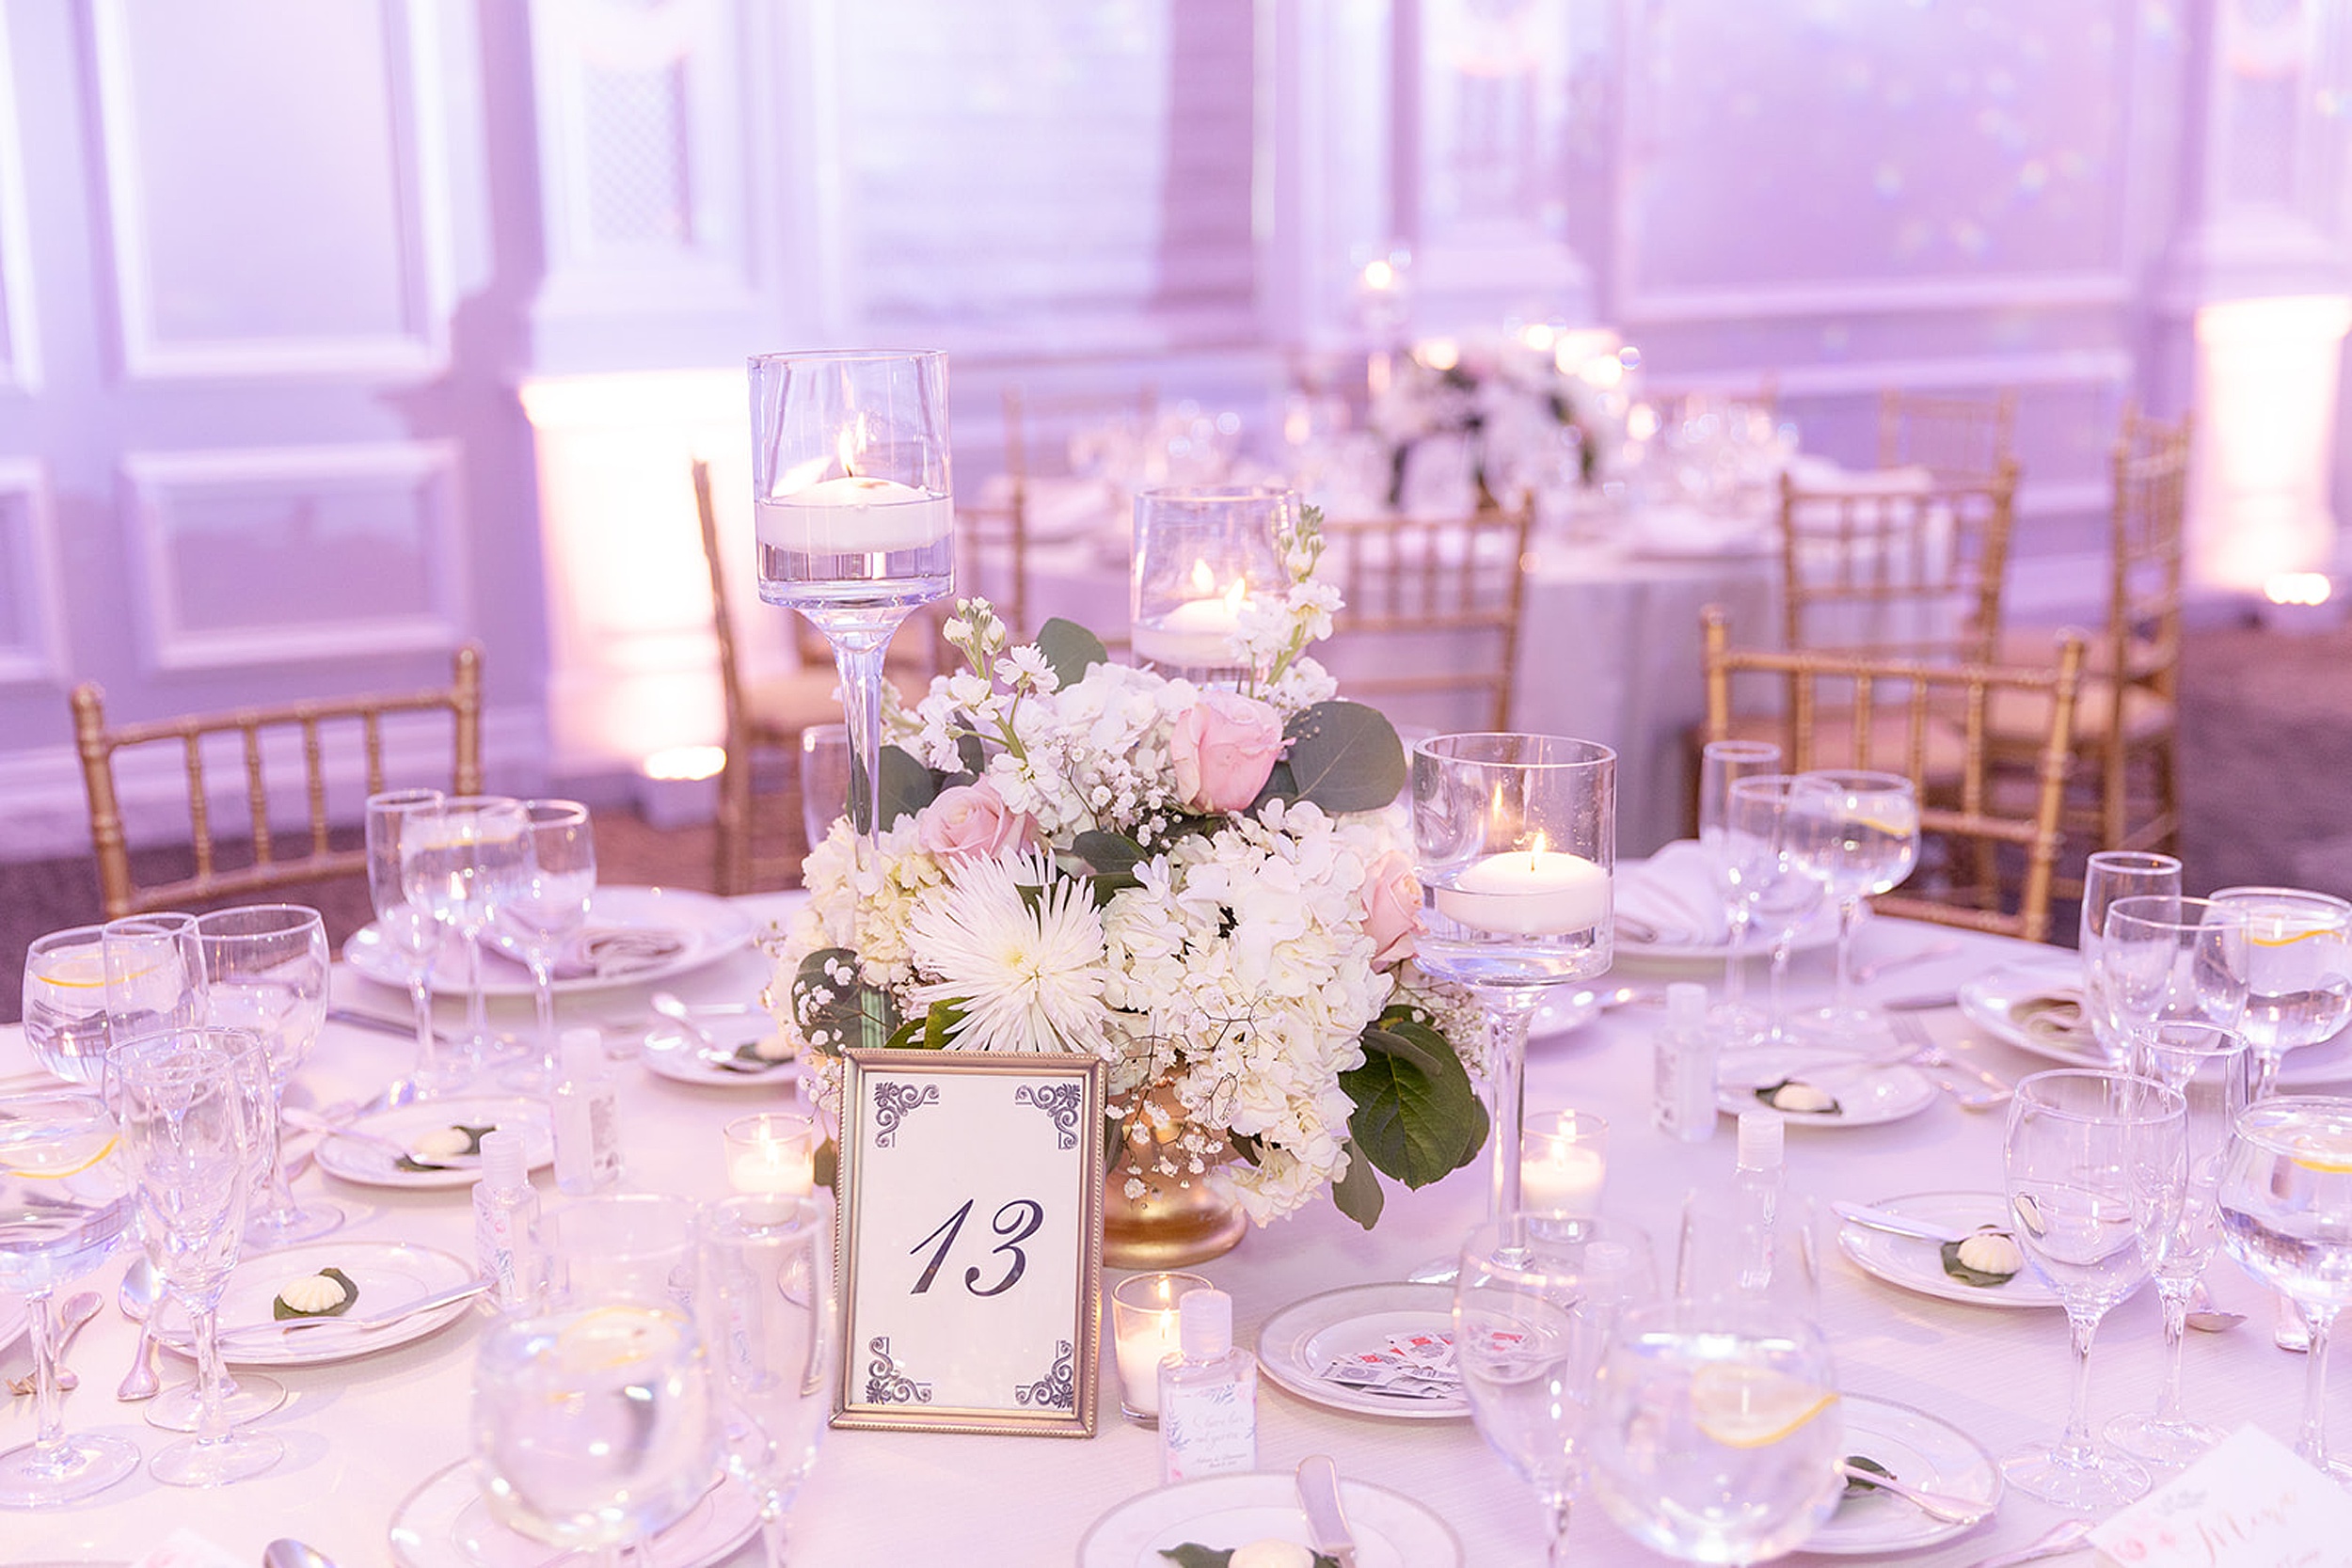 Details of a round table setting with a white and pink flower centerpiece